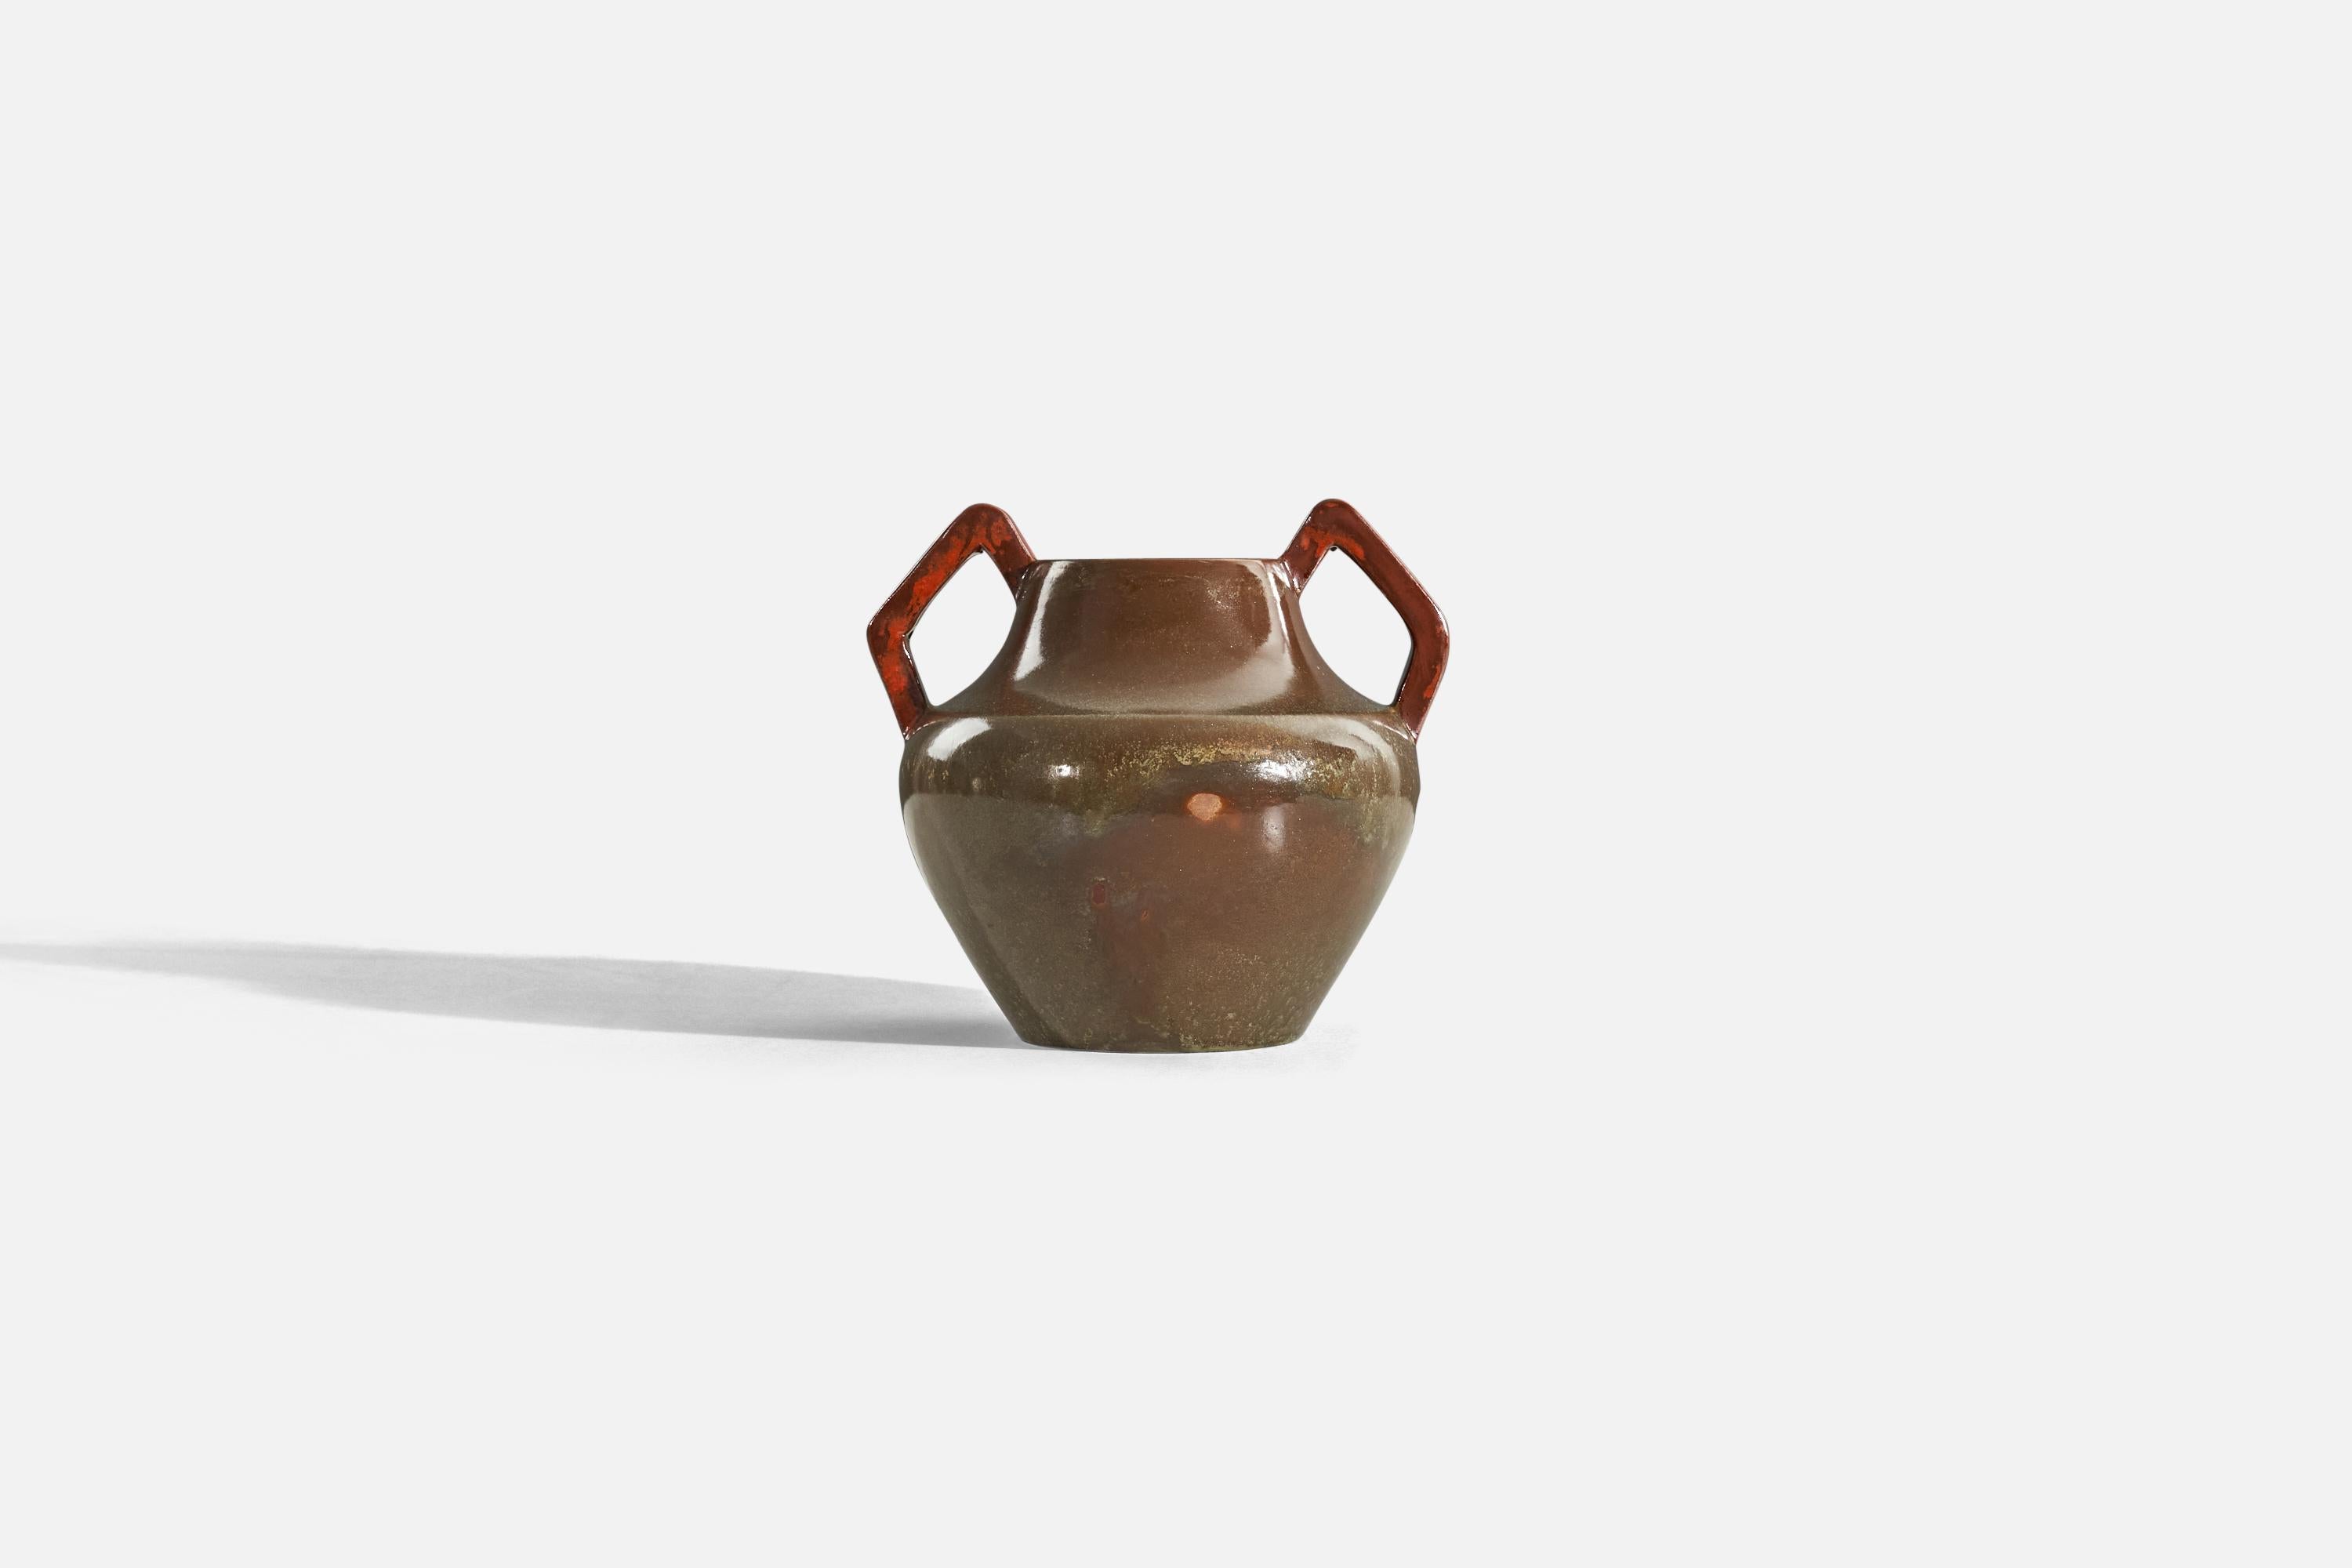 A brown, glazed stoneware vase designed and produced by Nyman & Nyman, Höganäs, Sweden, c. 1940s.